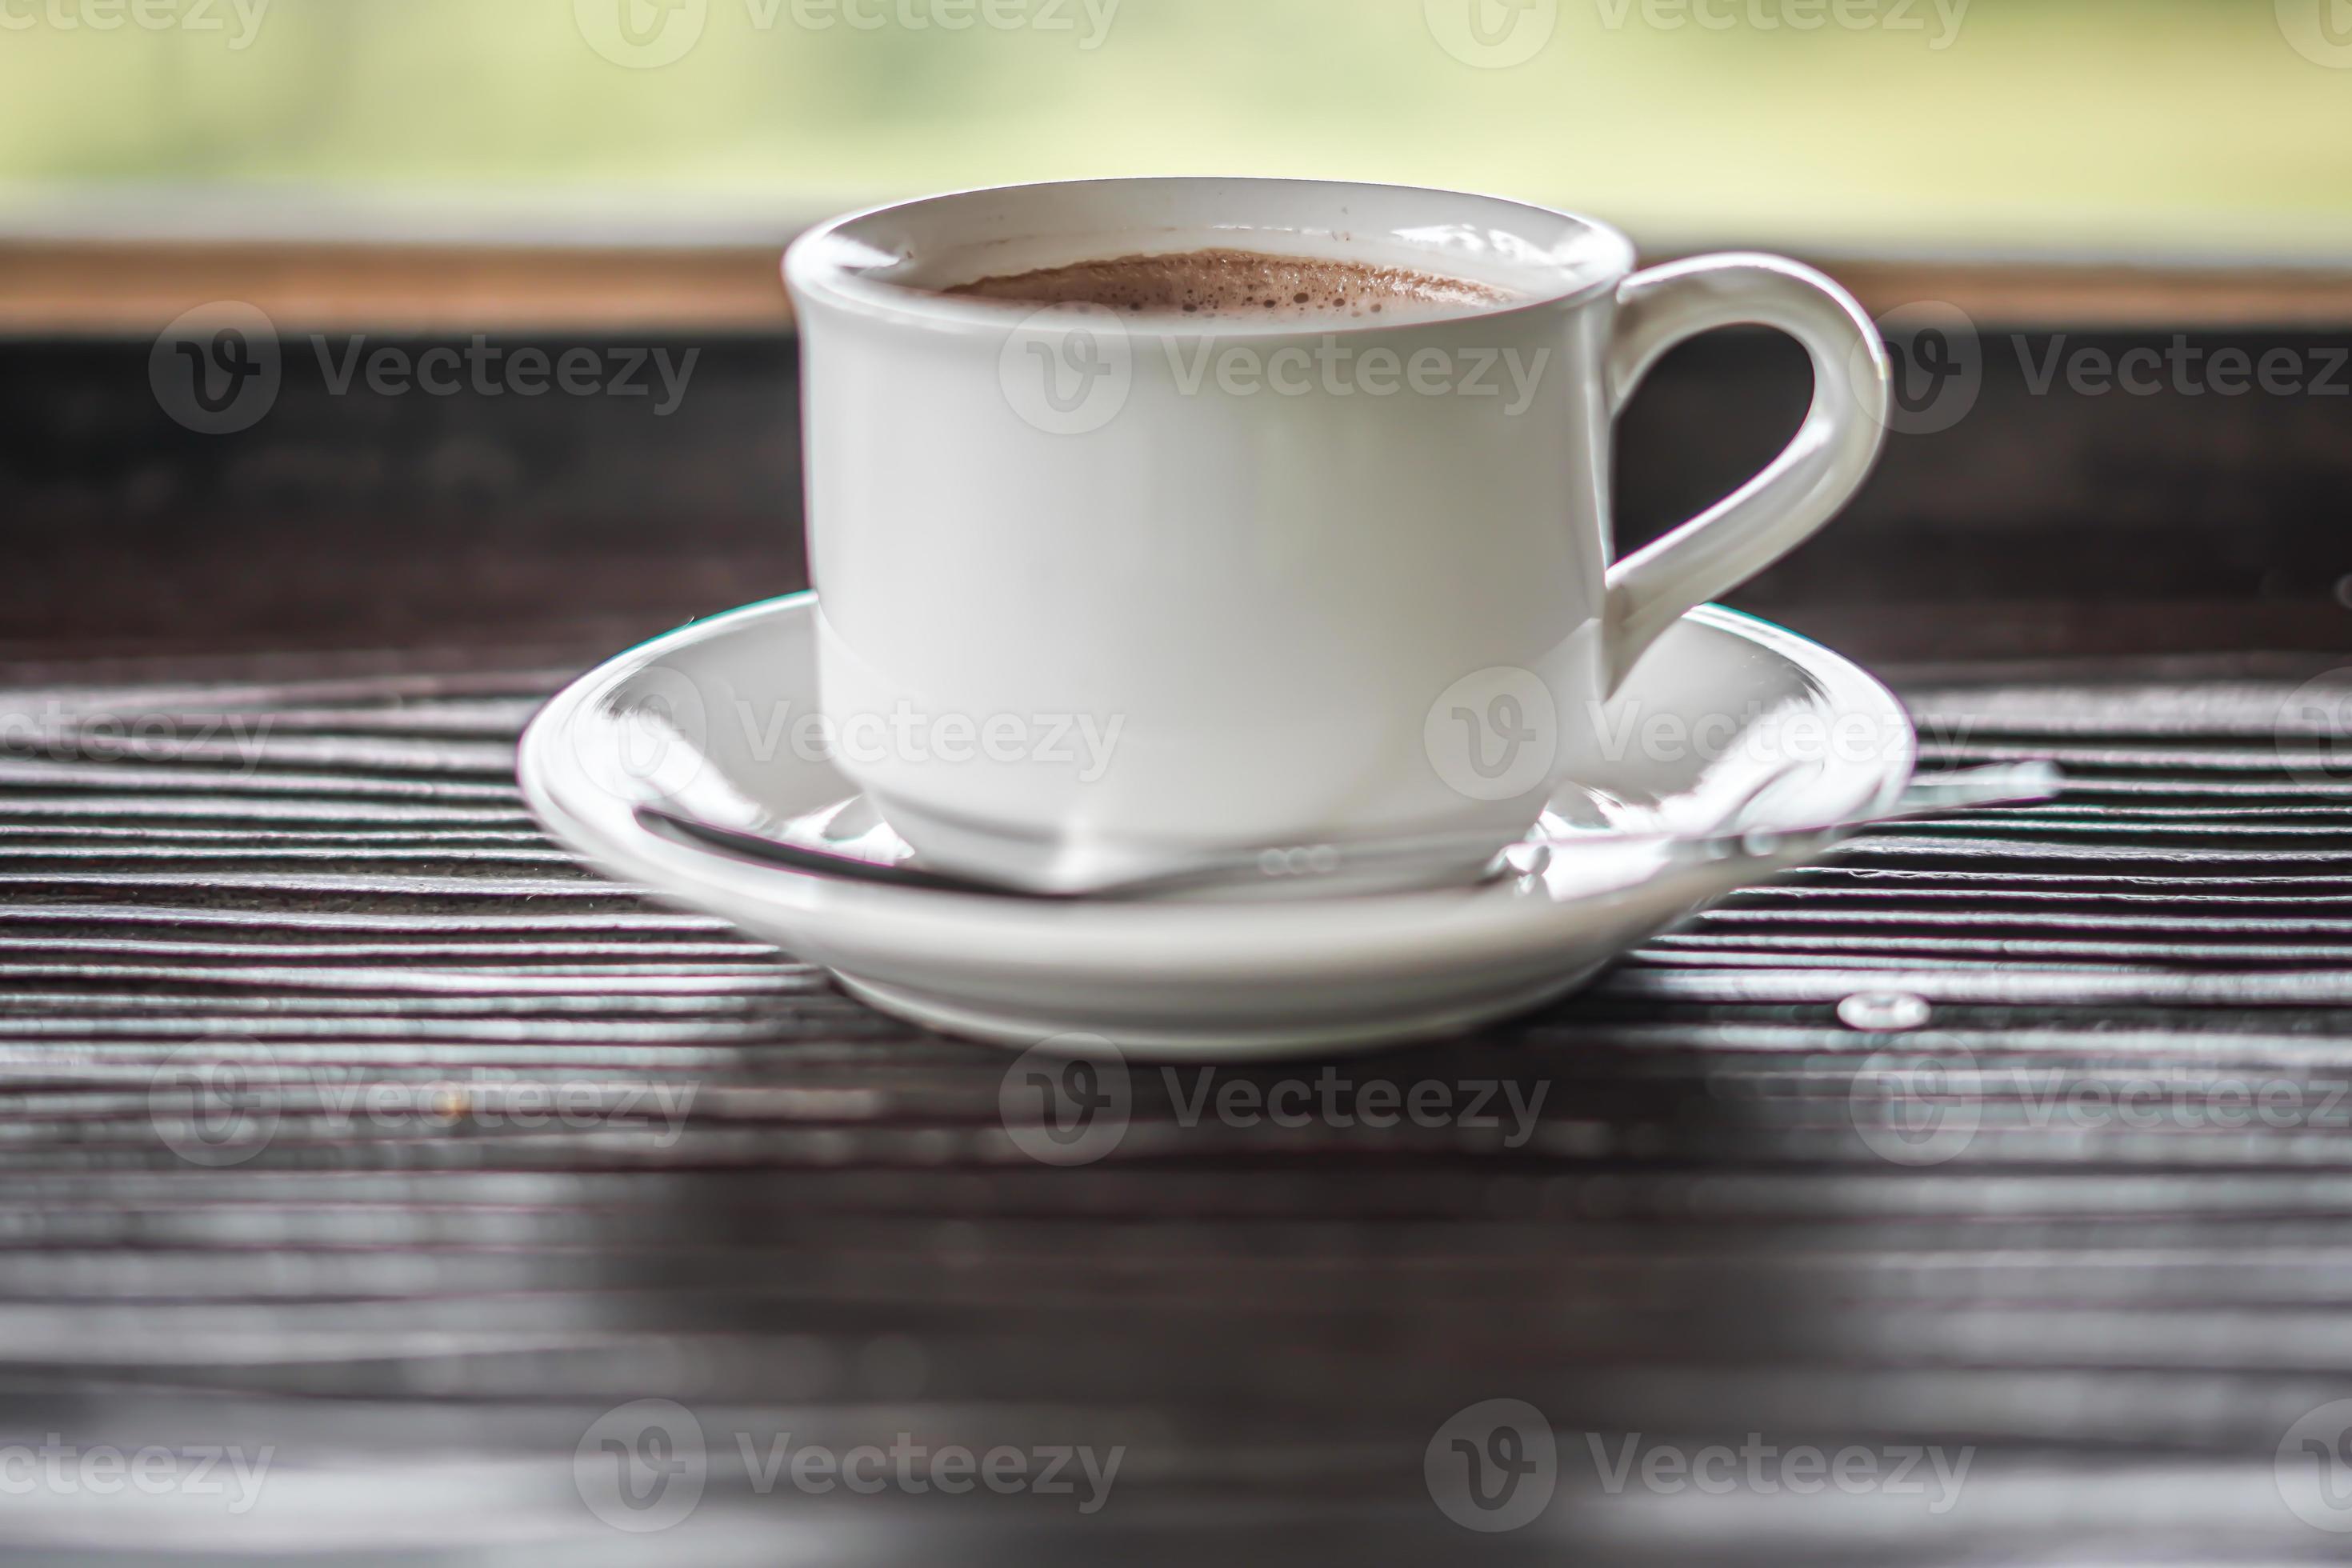 https://static.vecteezy.com/system/resources/previews/008/140/292/large_2x/aesthetic-a-cup-of-coffee-on-wooden-background-photo.jpg